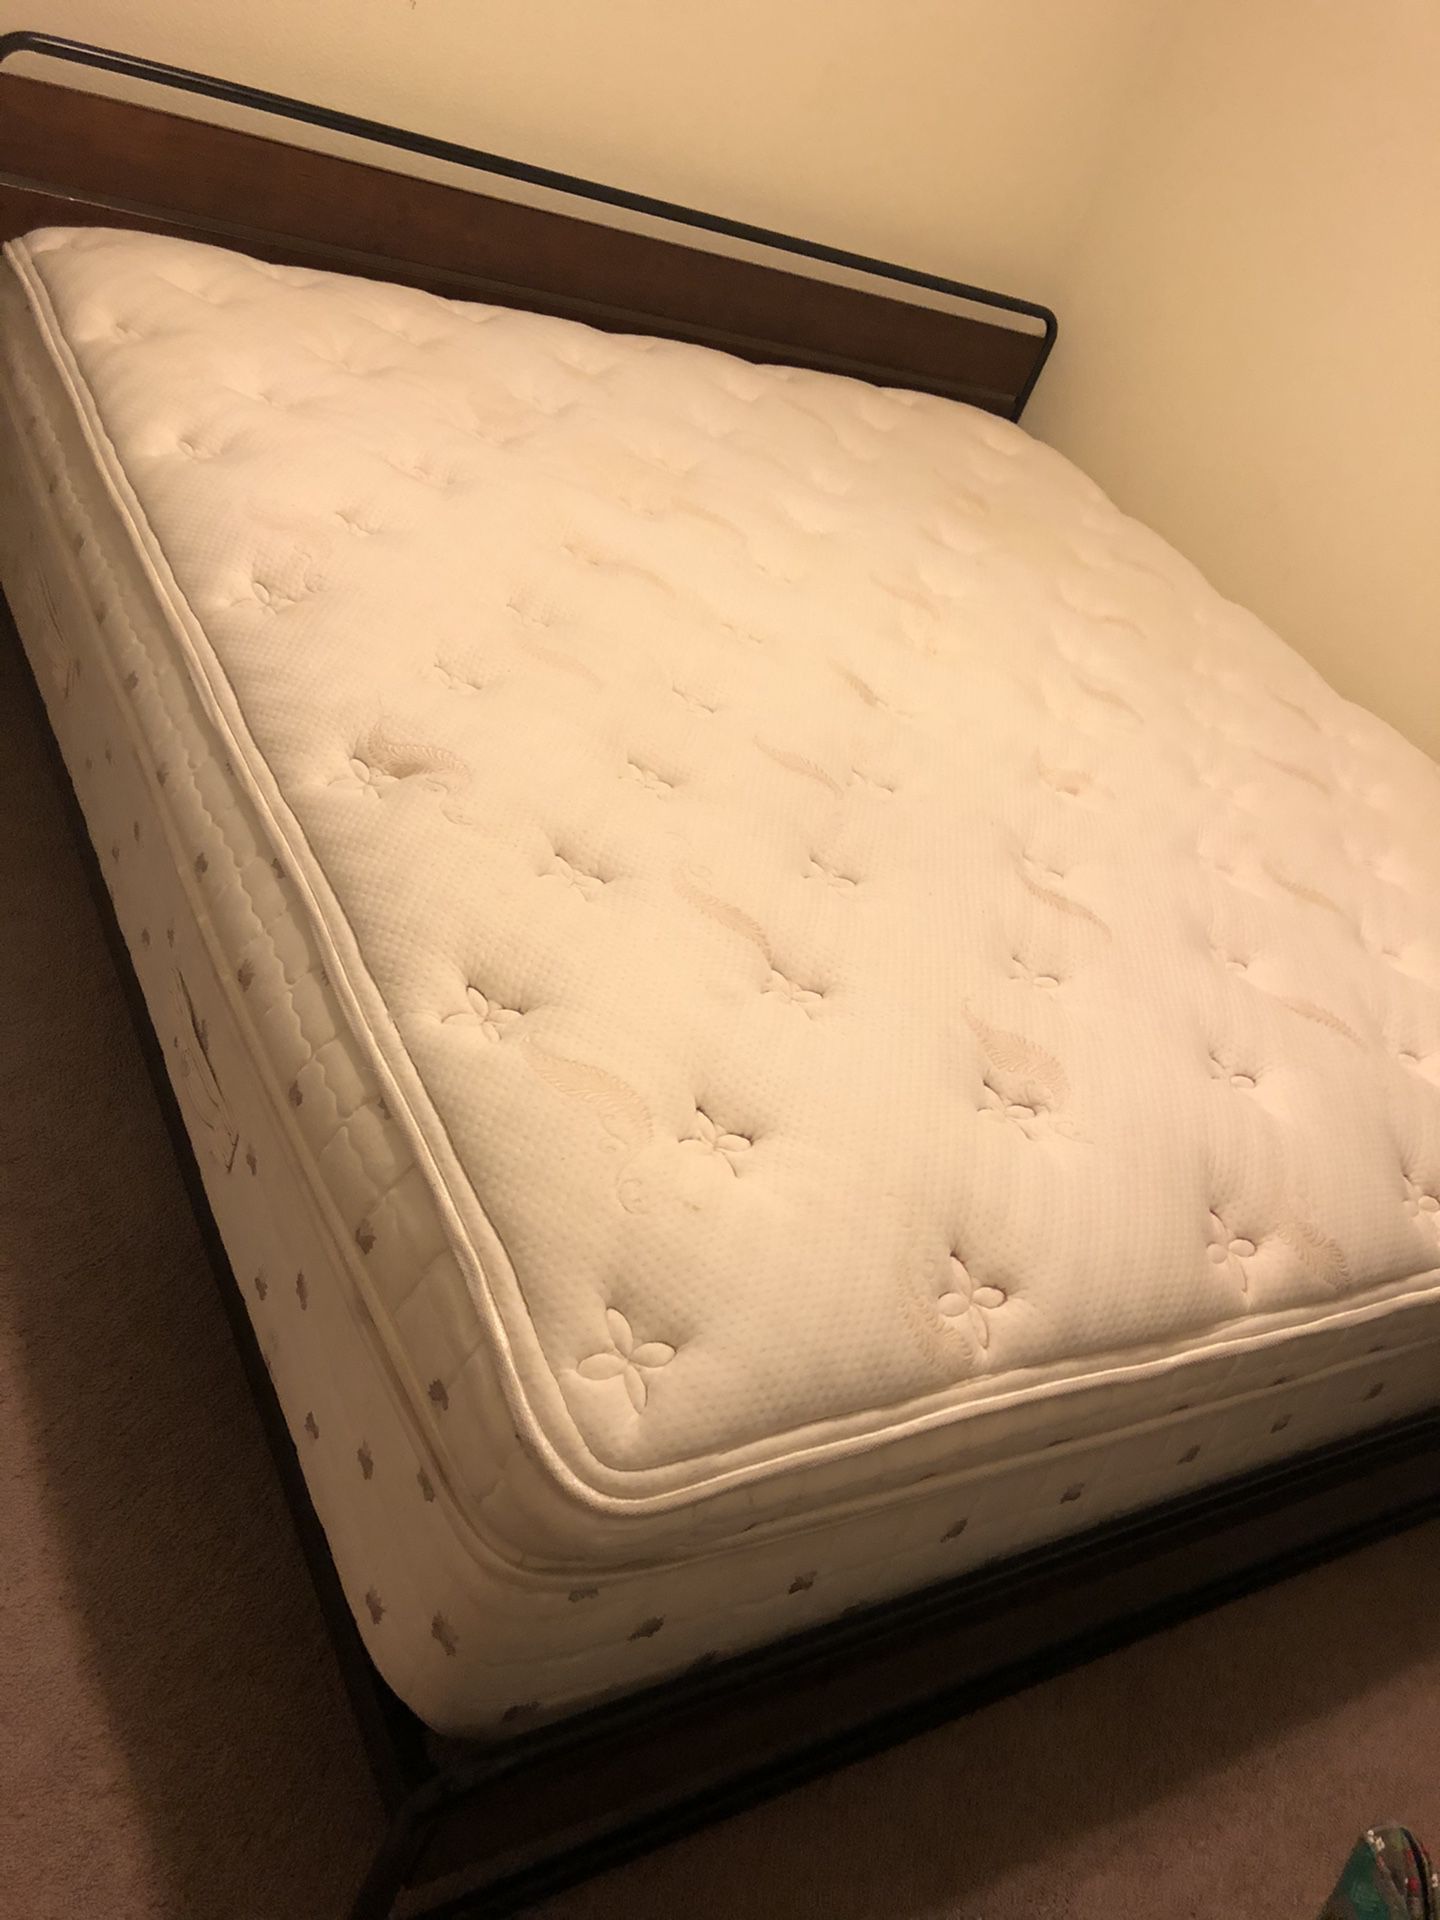 Serta pillow top King size Mattress and bed frame. Perfect for people who like a soft Mattress. This mattress was over 4 grand when we bought it. Sli